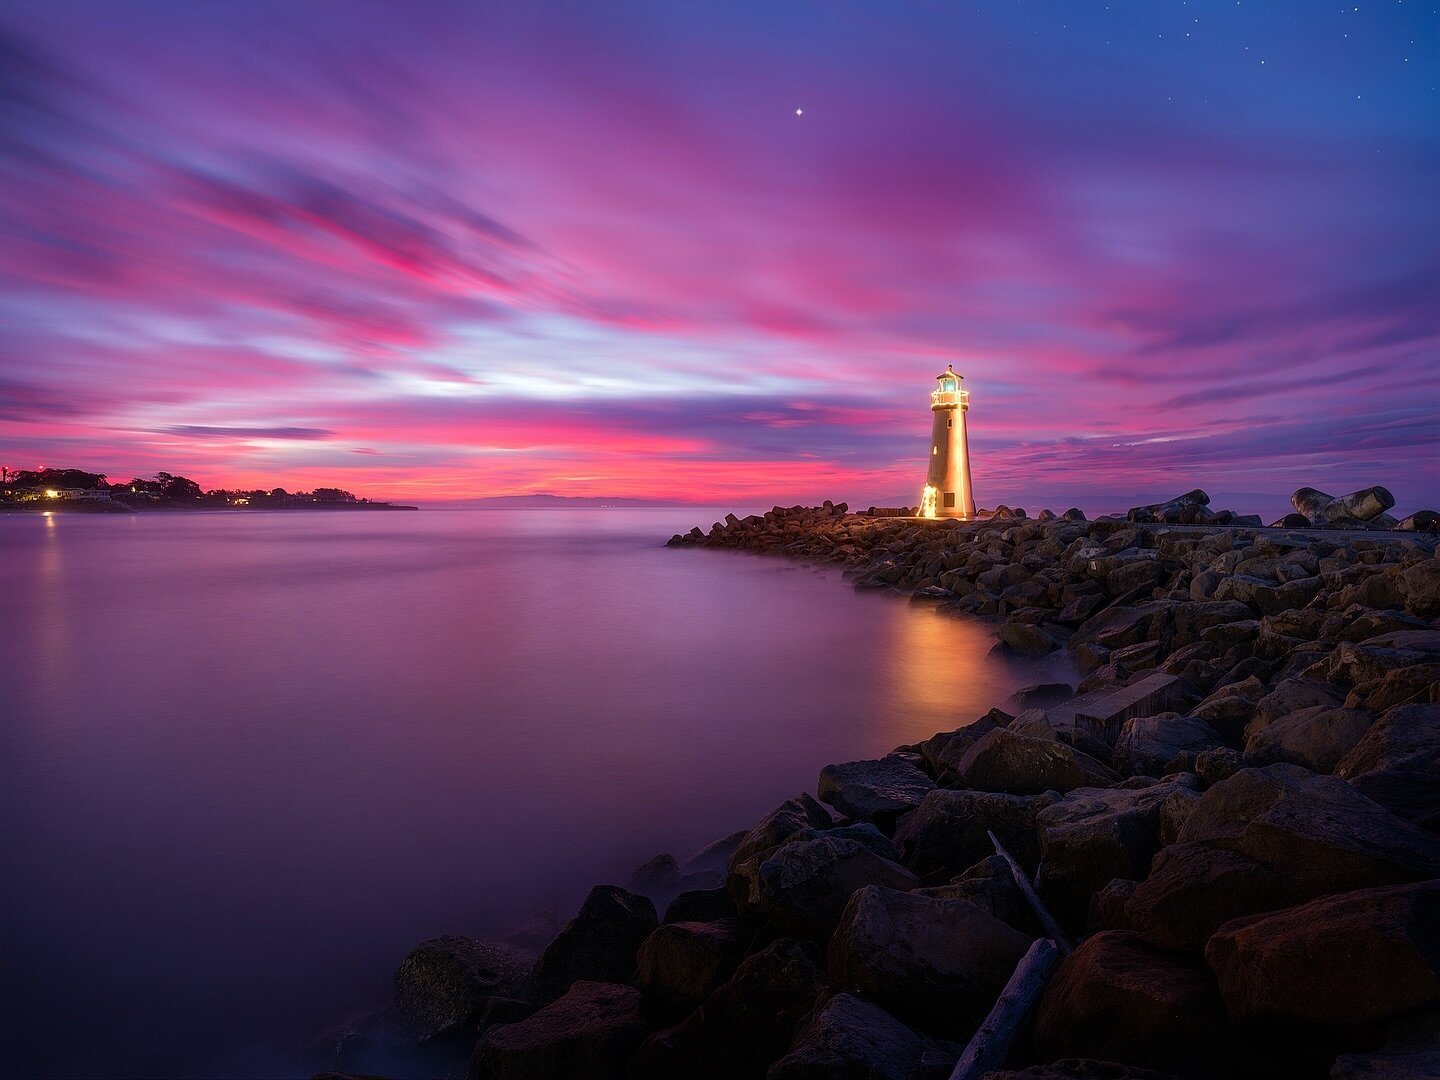 Lighthouse dressed up with Christmas Lights 🎄 

Venus peeking through the blue hour cotton candy skies. 
Beautiful morning at the west coast of California. 

📸 GFX 20mm
⭕️ @mavenfilters 
🖥️ @withmediumrare 

#california #bluehour #venus #sunrise #